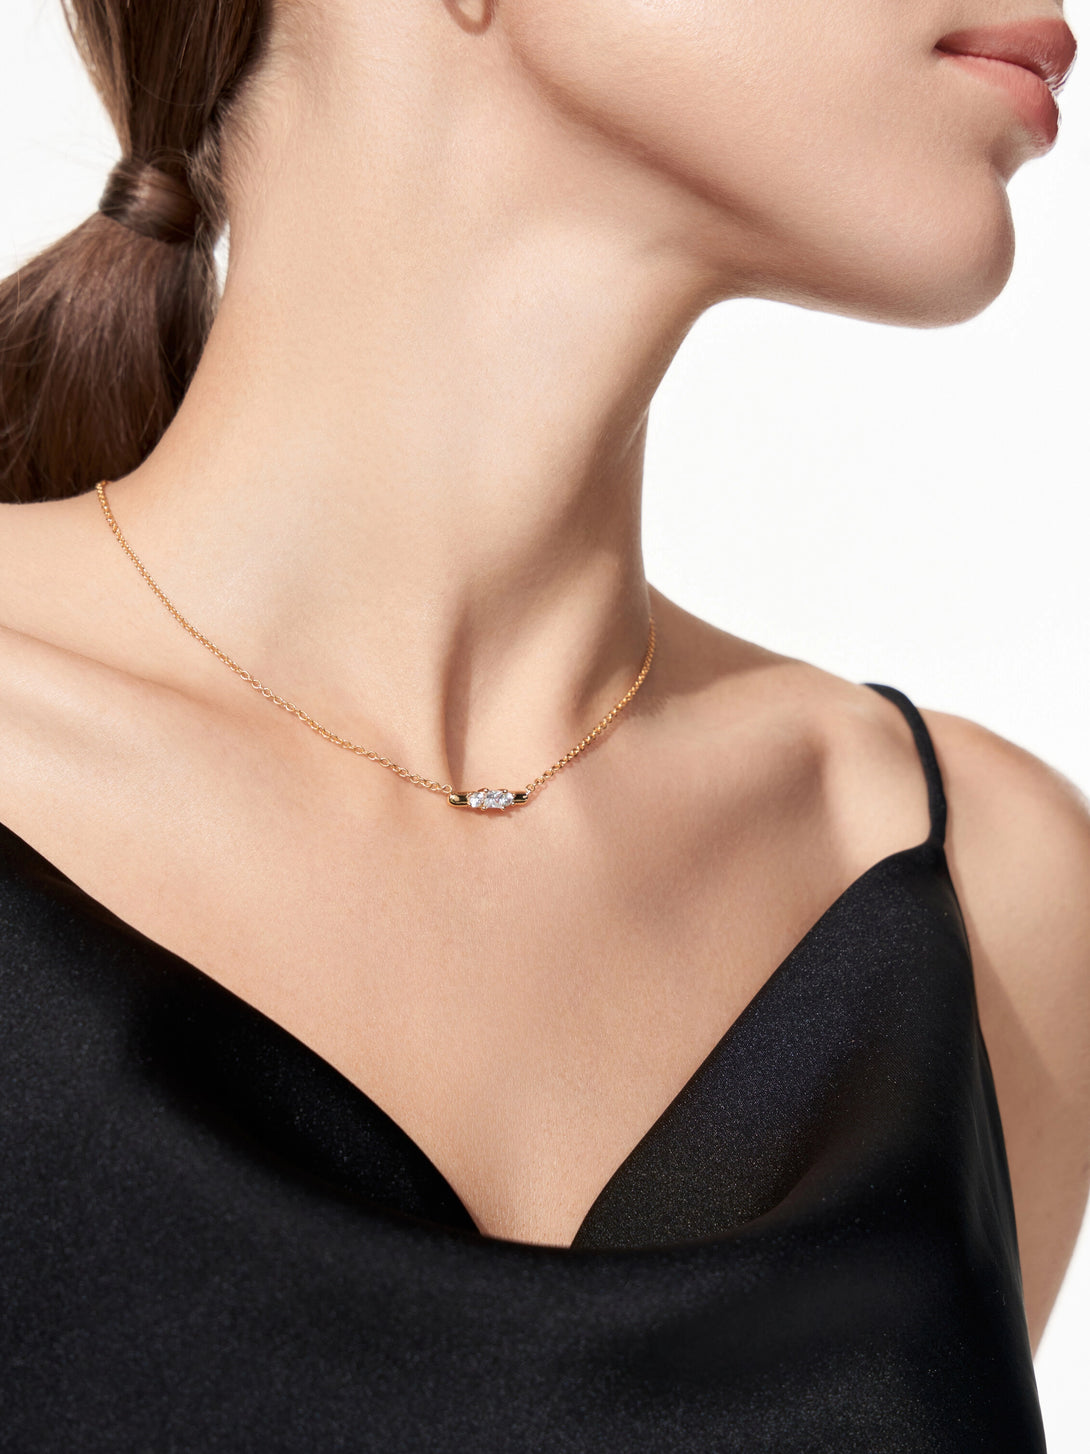 Oval Delicate Necklace - OOTDY